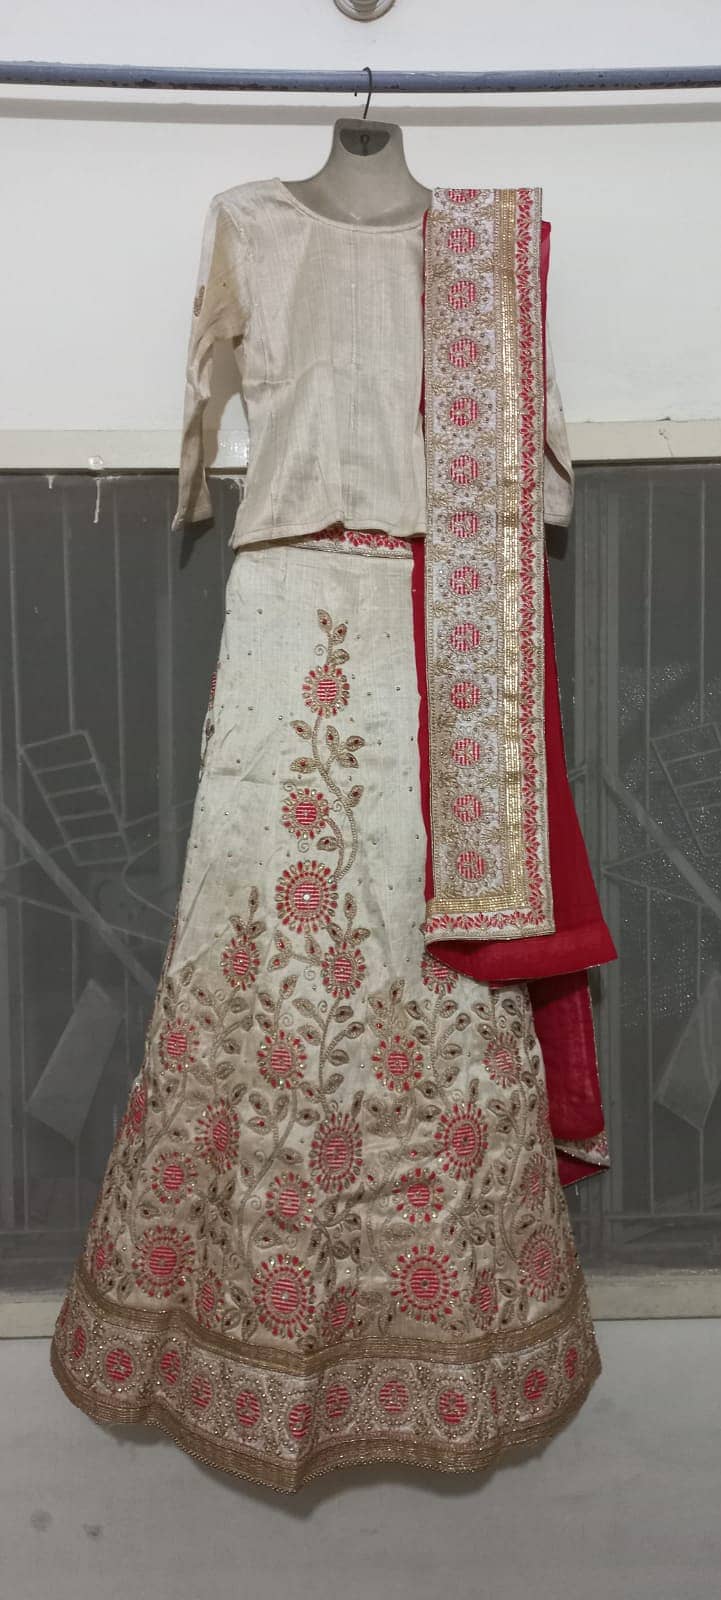 Pure indian lehanga choli new never wore  Red and fawn color  Size med 1